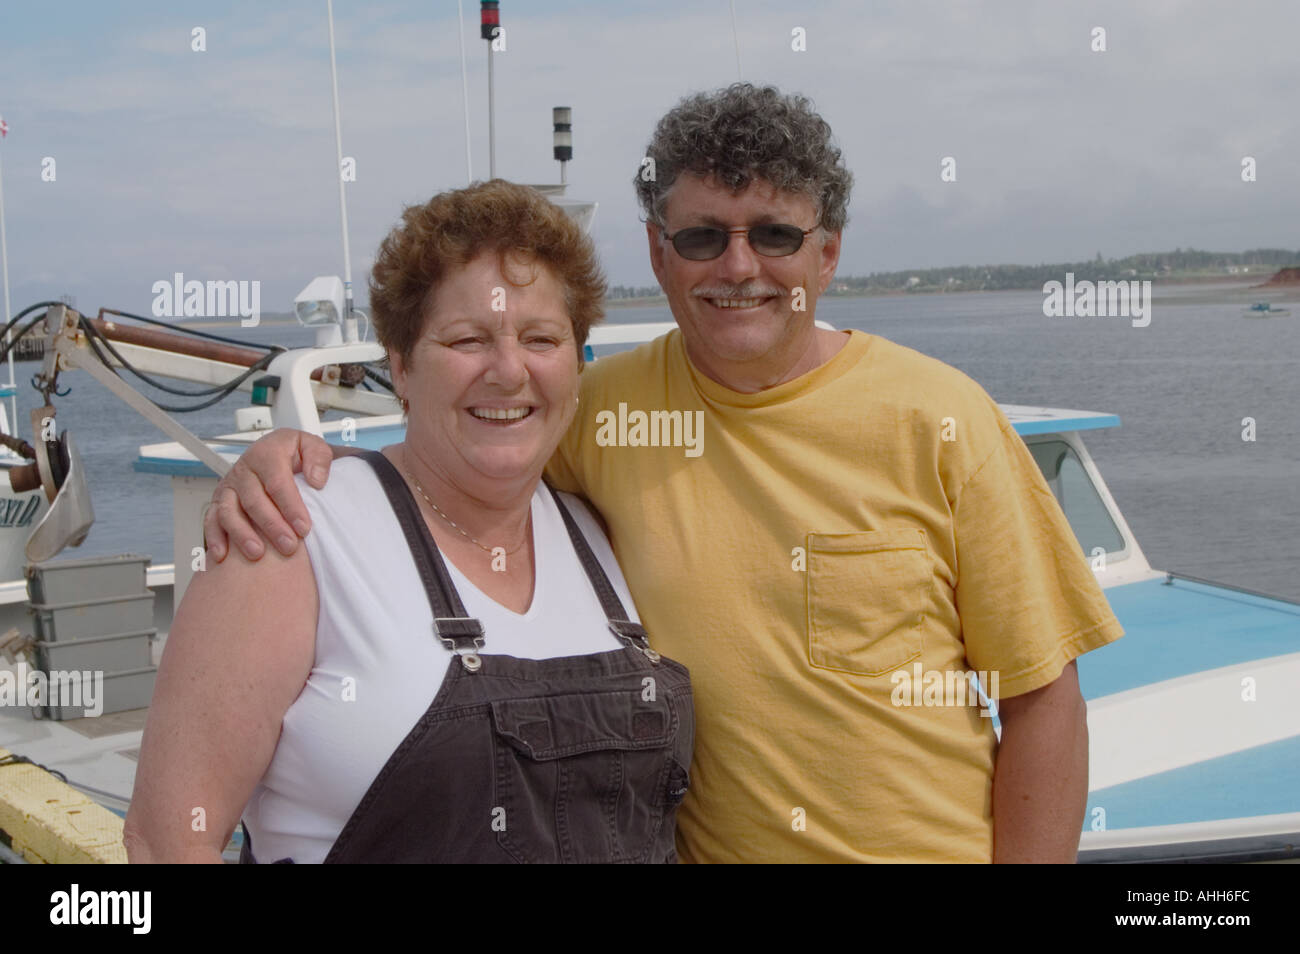 Mussel farmers husband and wife in front of their boat Cricker Crunch Rustico Harbor Prince Edward Island Canada Stock Photo